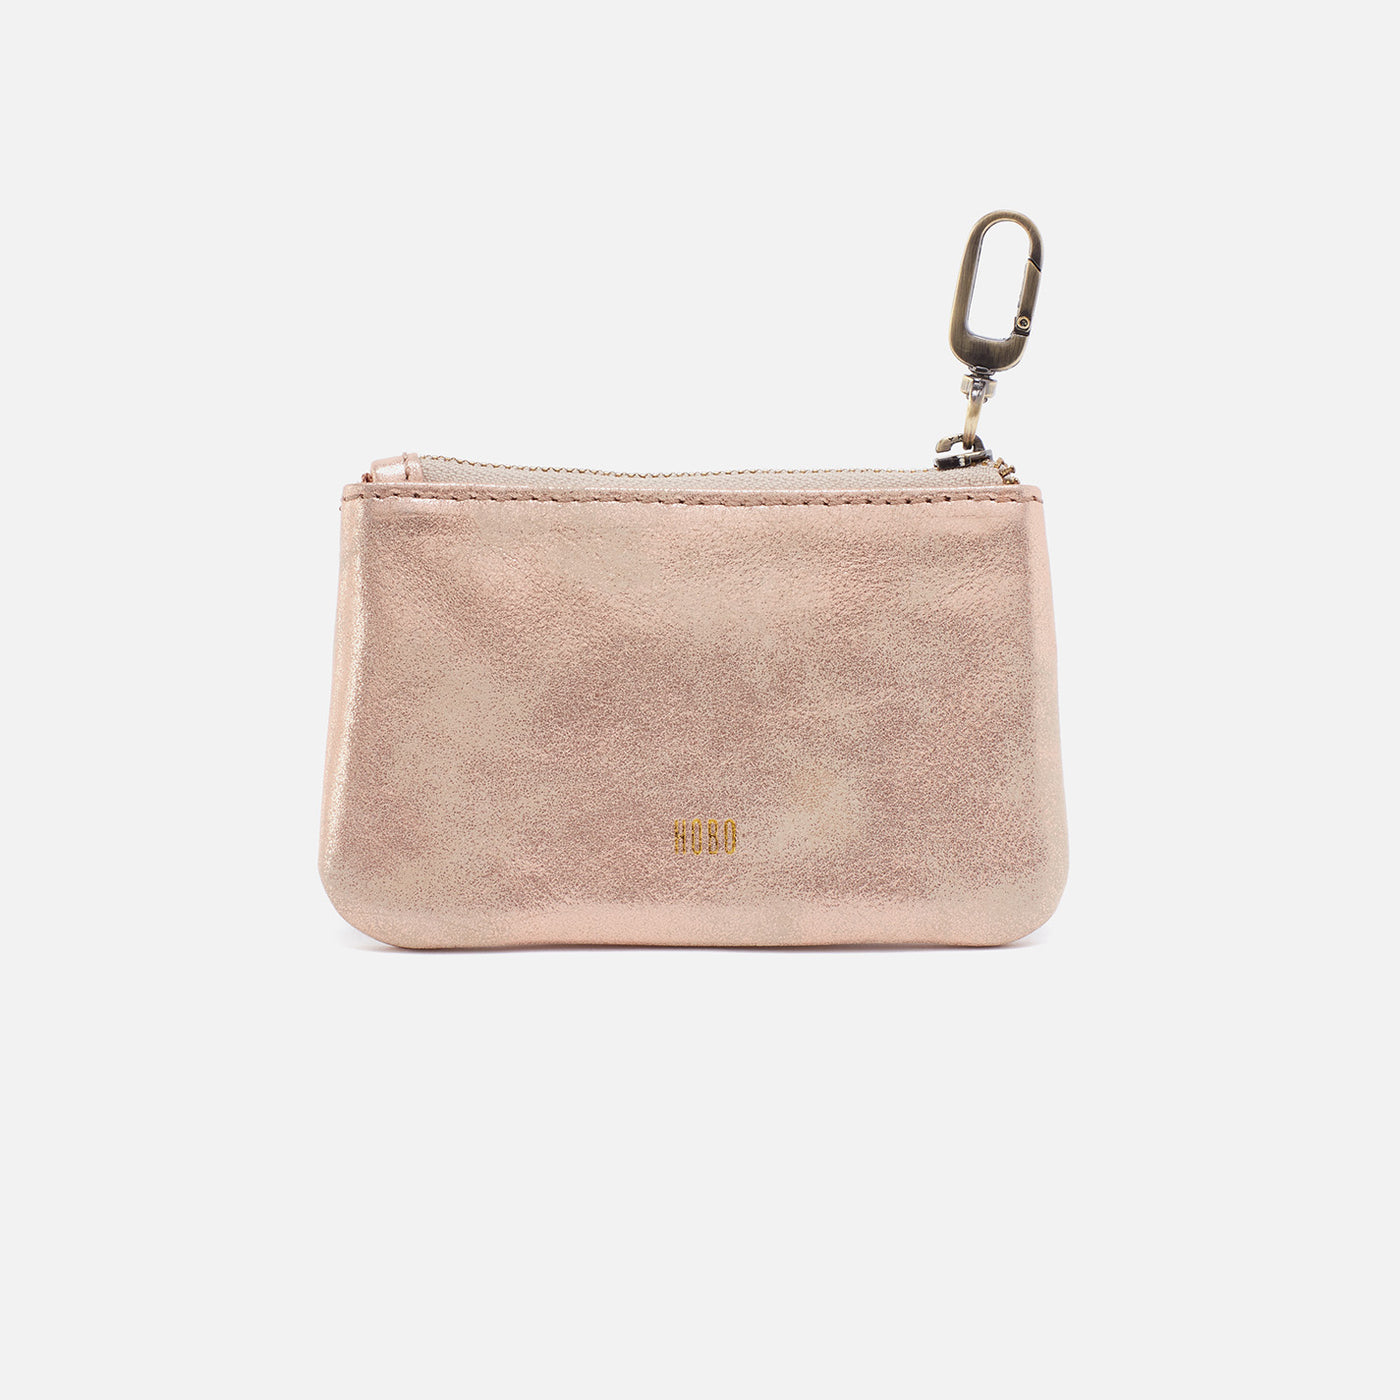 Monogram Pouch in Metallic Soft Leather - N